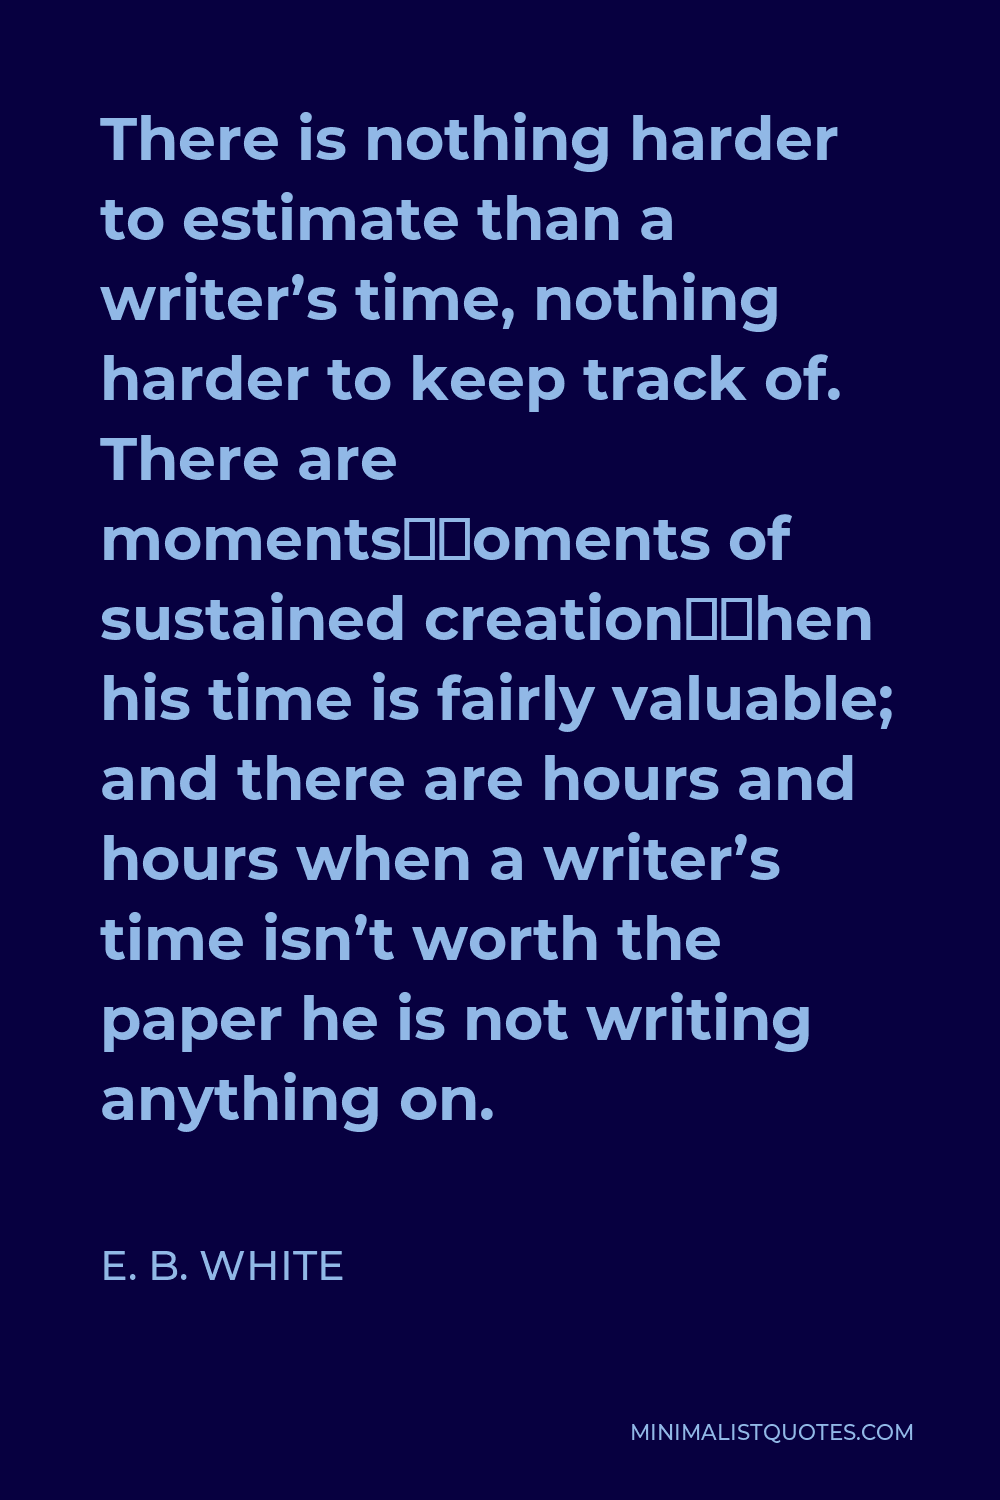 E. B. White Quote - There is nothing harder to estimate than a writer’s time, nothing harder to keep track of. There are moments—moments of sustained creation—when his time is fairly valuable; and there are hours and hours when a writer’s time isn’t worth the paper he is not writing anything on.